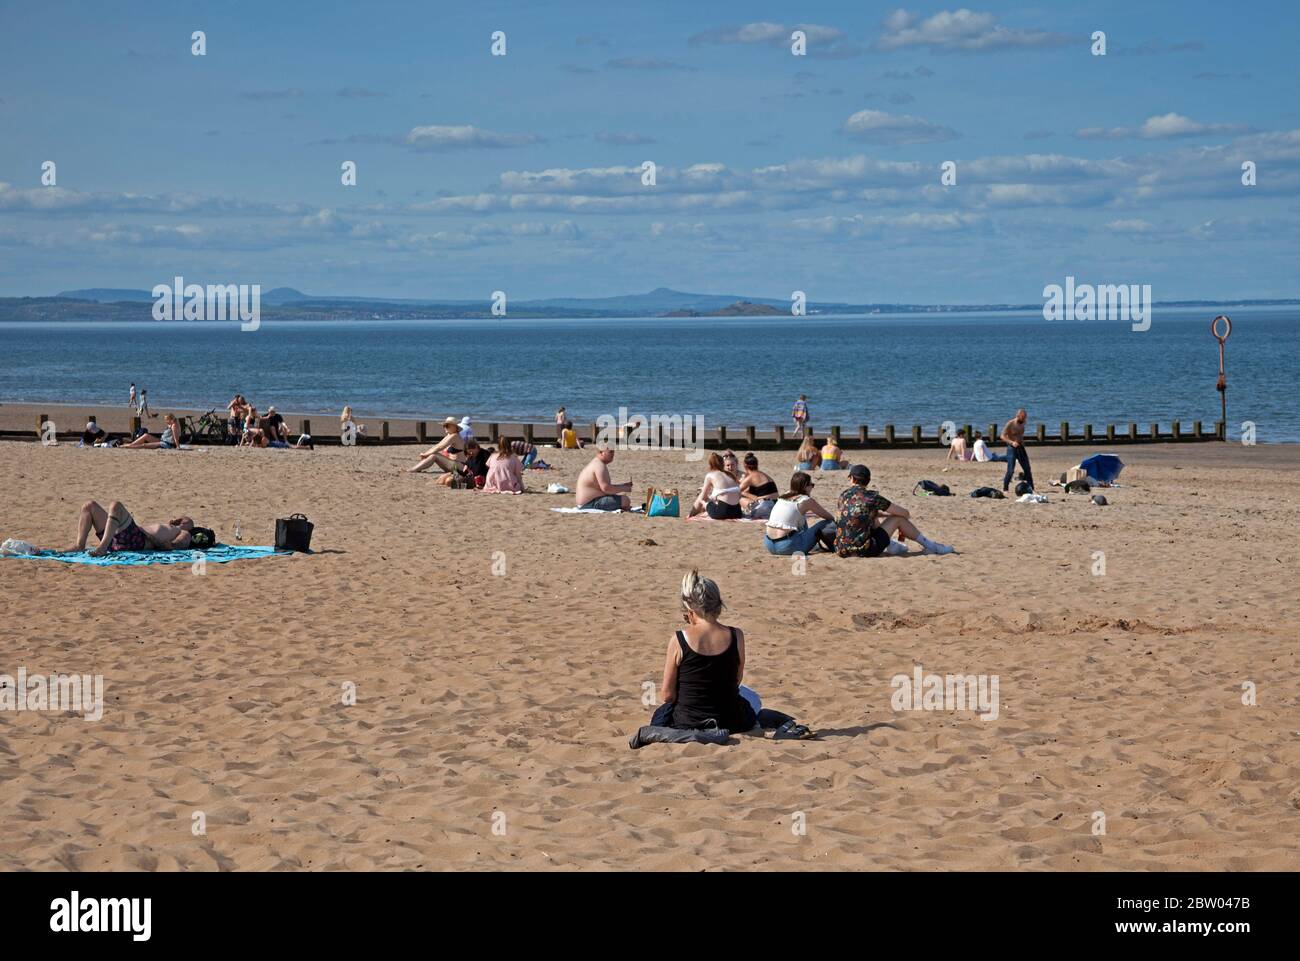 Portobello, Edinburgh, Scotland. 28 May 2020. 25 degrees late afternoon at the seaside. Reasonably busy beach and promenade with the Police in attendance continuing with the pass through but not bothering to talk to anyone regarding sitting around as the Scottish First Minister eases some of the restrictions for the Scottish public. Stock Photo